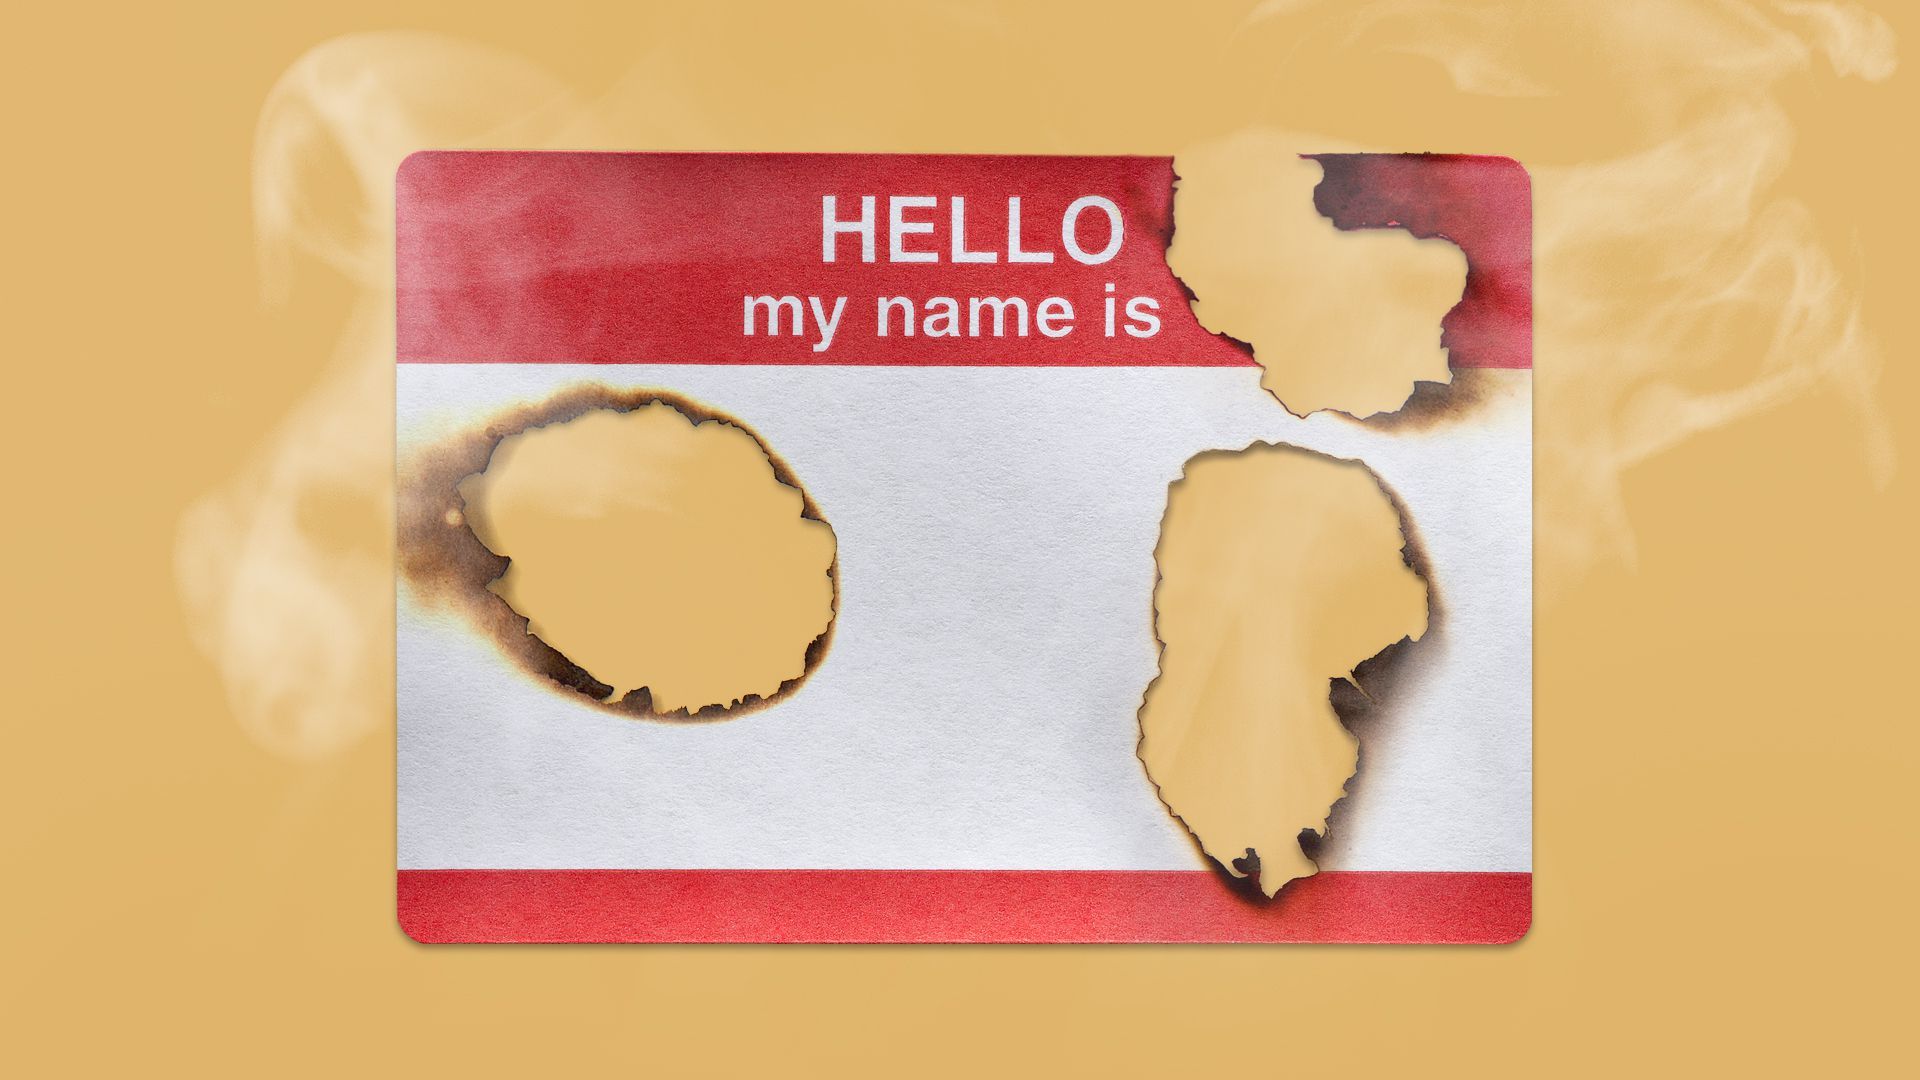 Illustration of a smoldering name tag sticker with burn holes